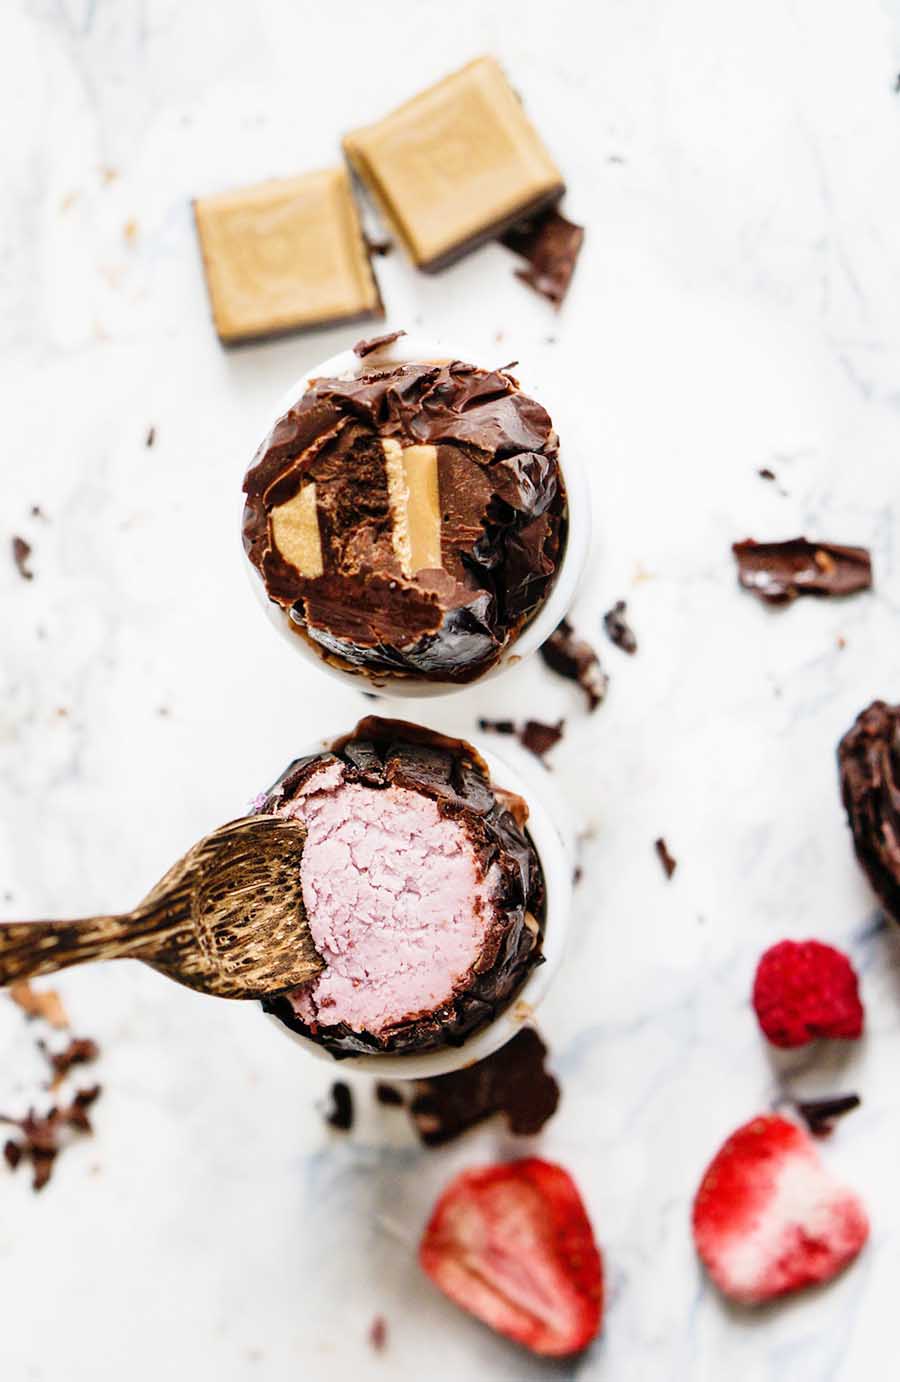 Overhead view of a spoon scooping out a pink dessert from inside a half of a chocolate egg with various chocolate pieces and fruit pieces laying around.